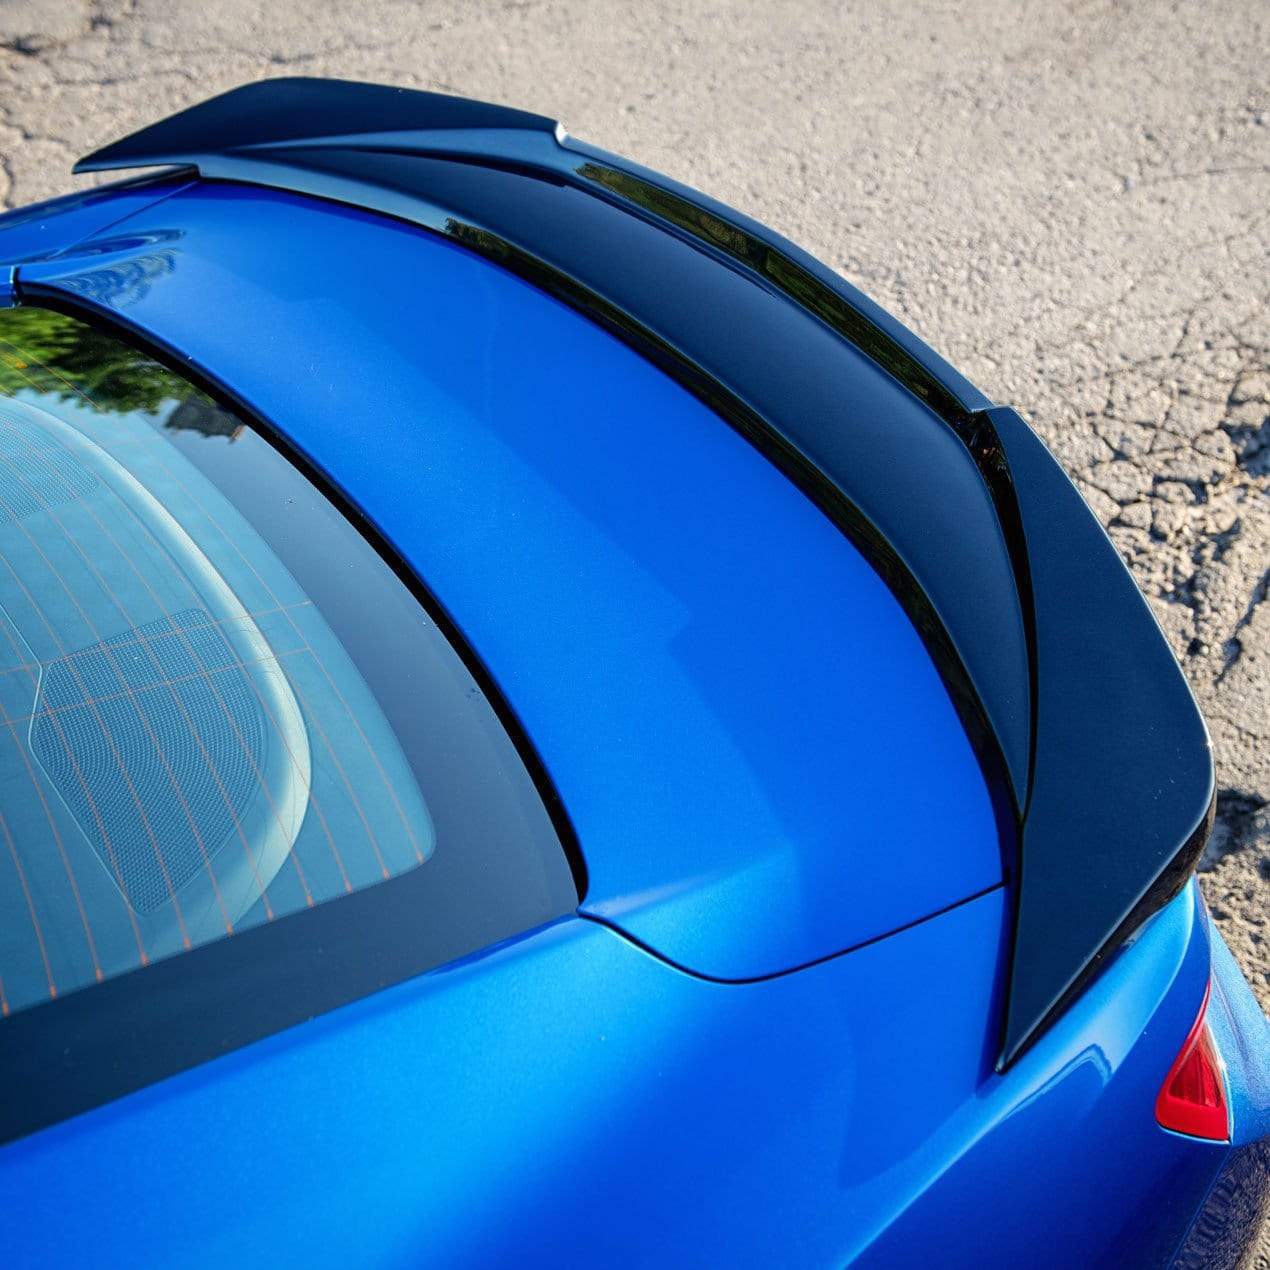 ACS Composite Rear Deck Spoiler for Camaro V6 & I4 [48-4-016]GBA - Enhances down-force and complements the sophisticated lines of the 6th gen Camaro. Direct bolt-on with no modifications required. Optional wicker upgrade available.